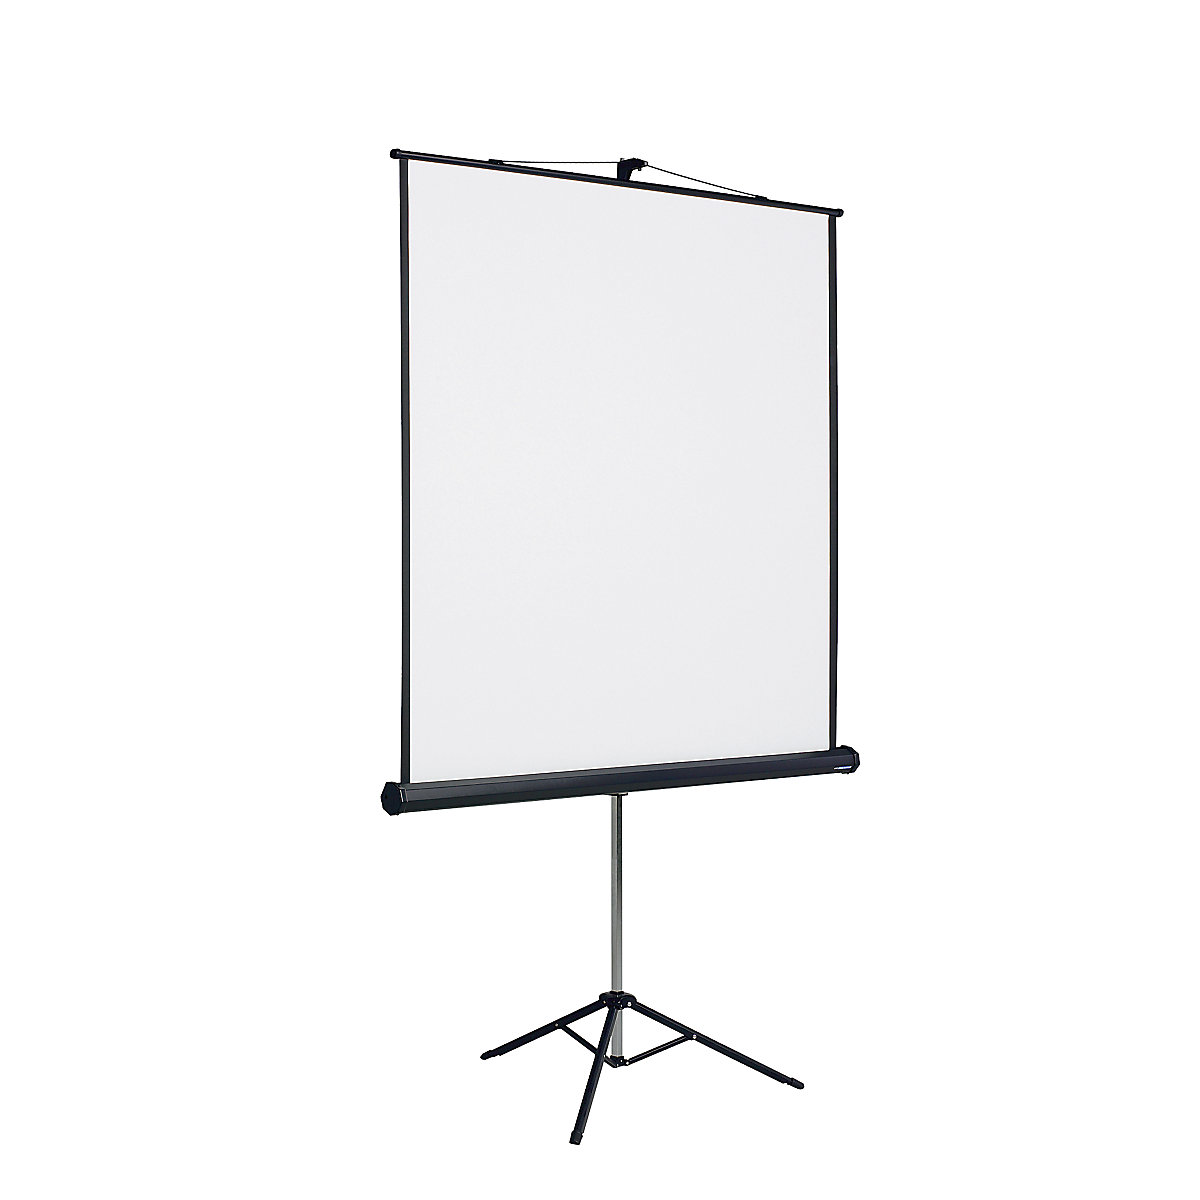 Projection screen with stand